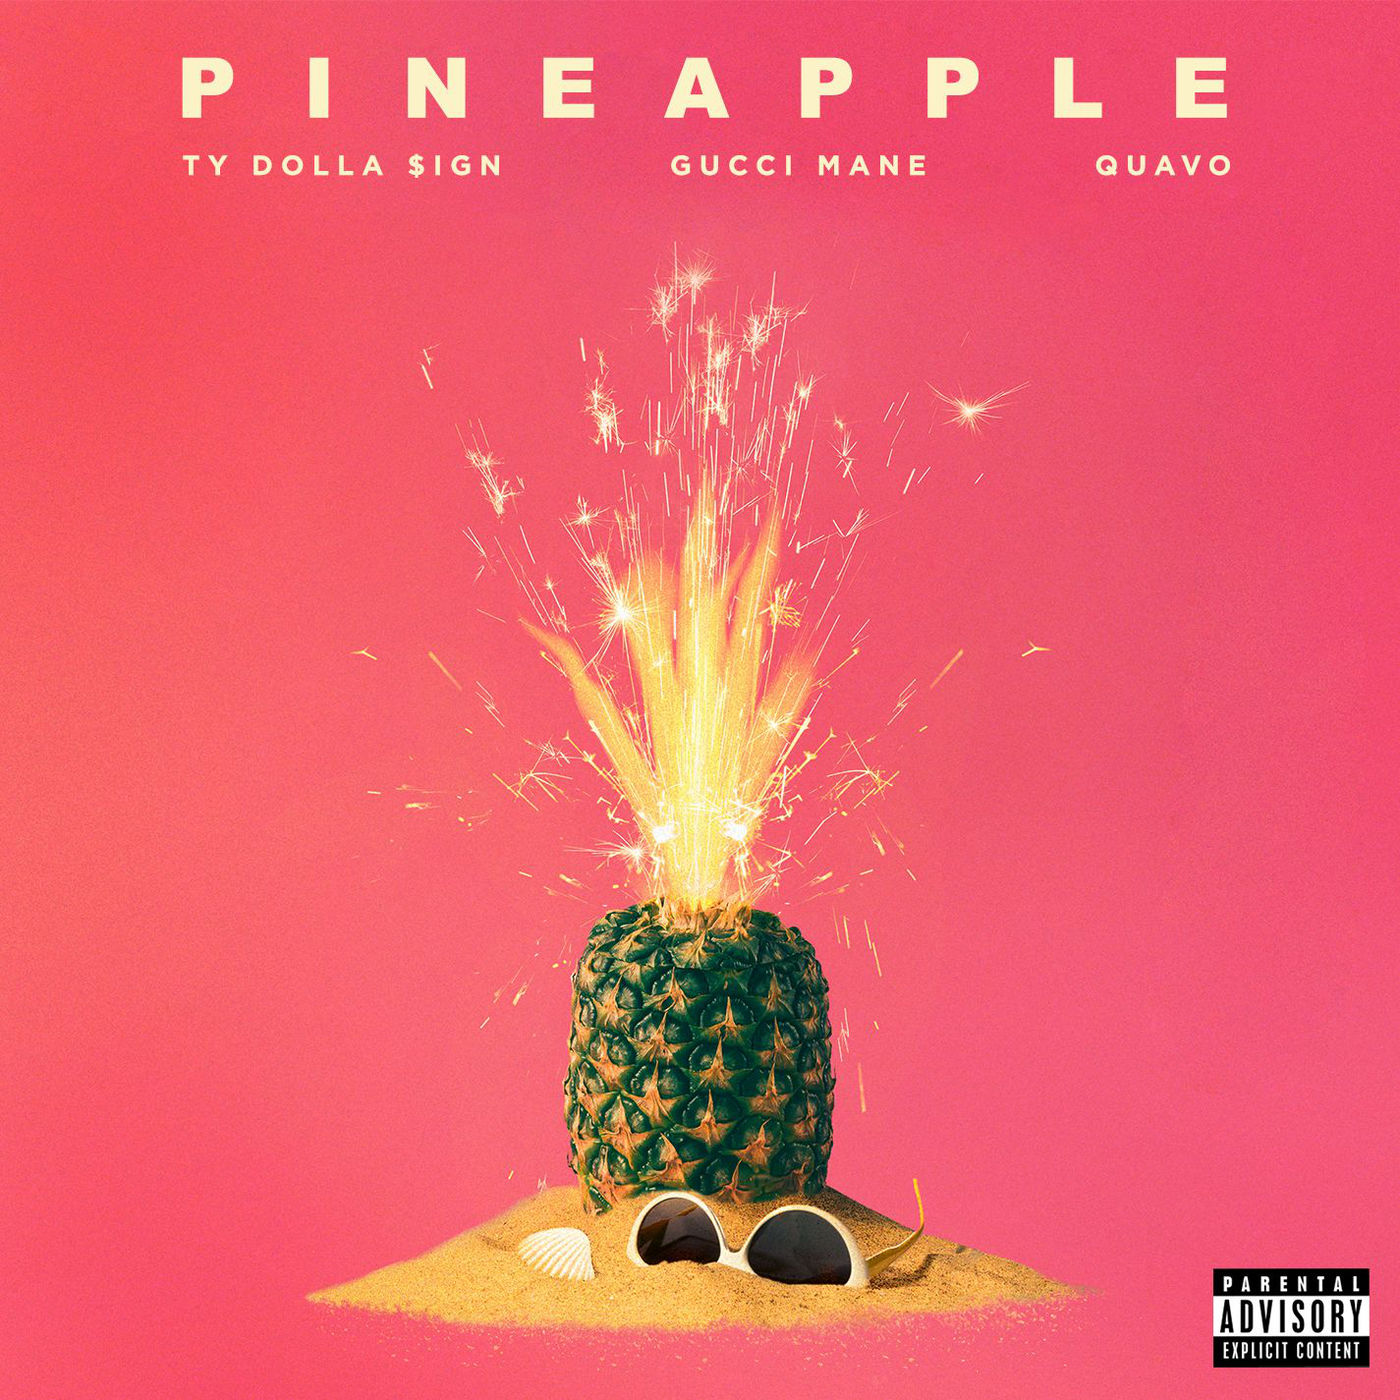 New Music: Ty Dolla Sign – 'Pineapple' (Feat. Gucci Mane & Quavo) | HipHop-N-More